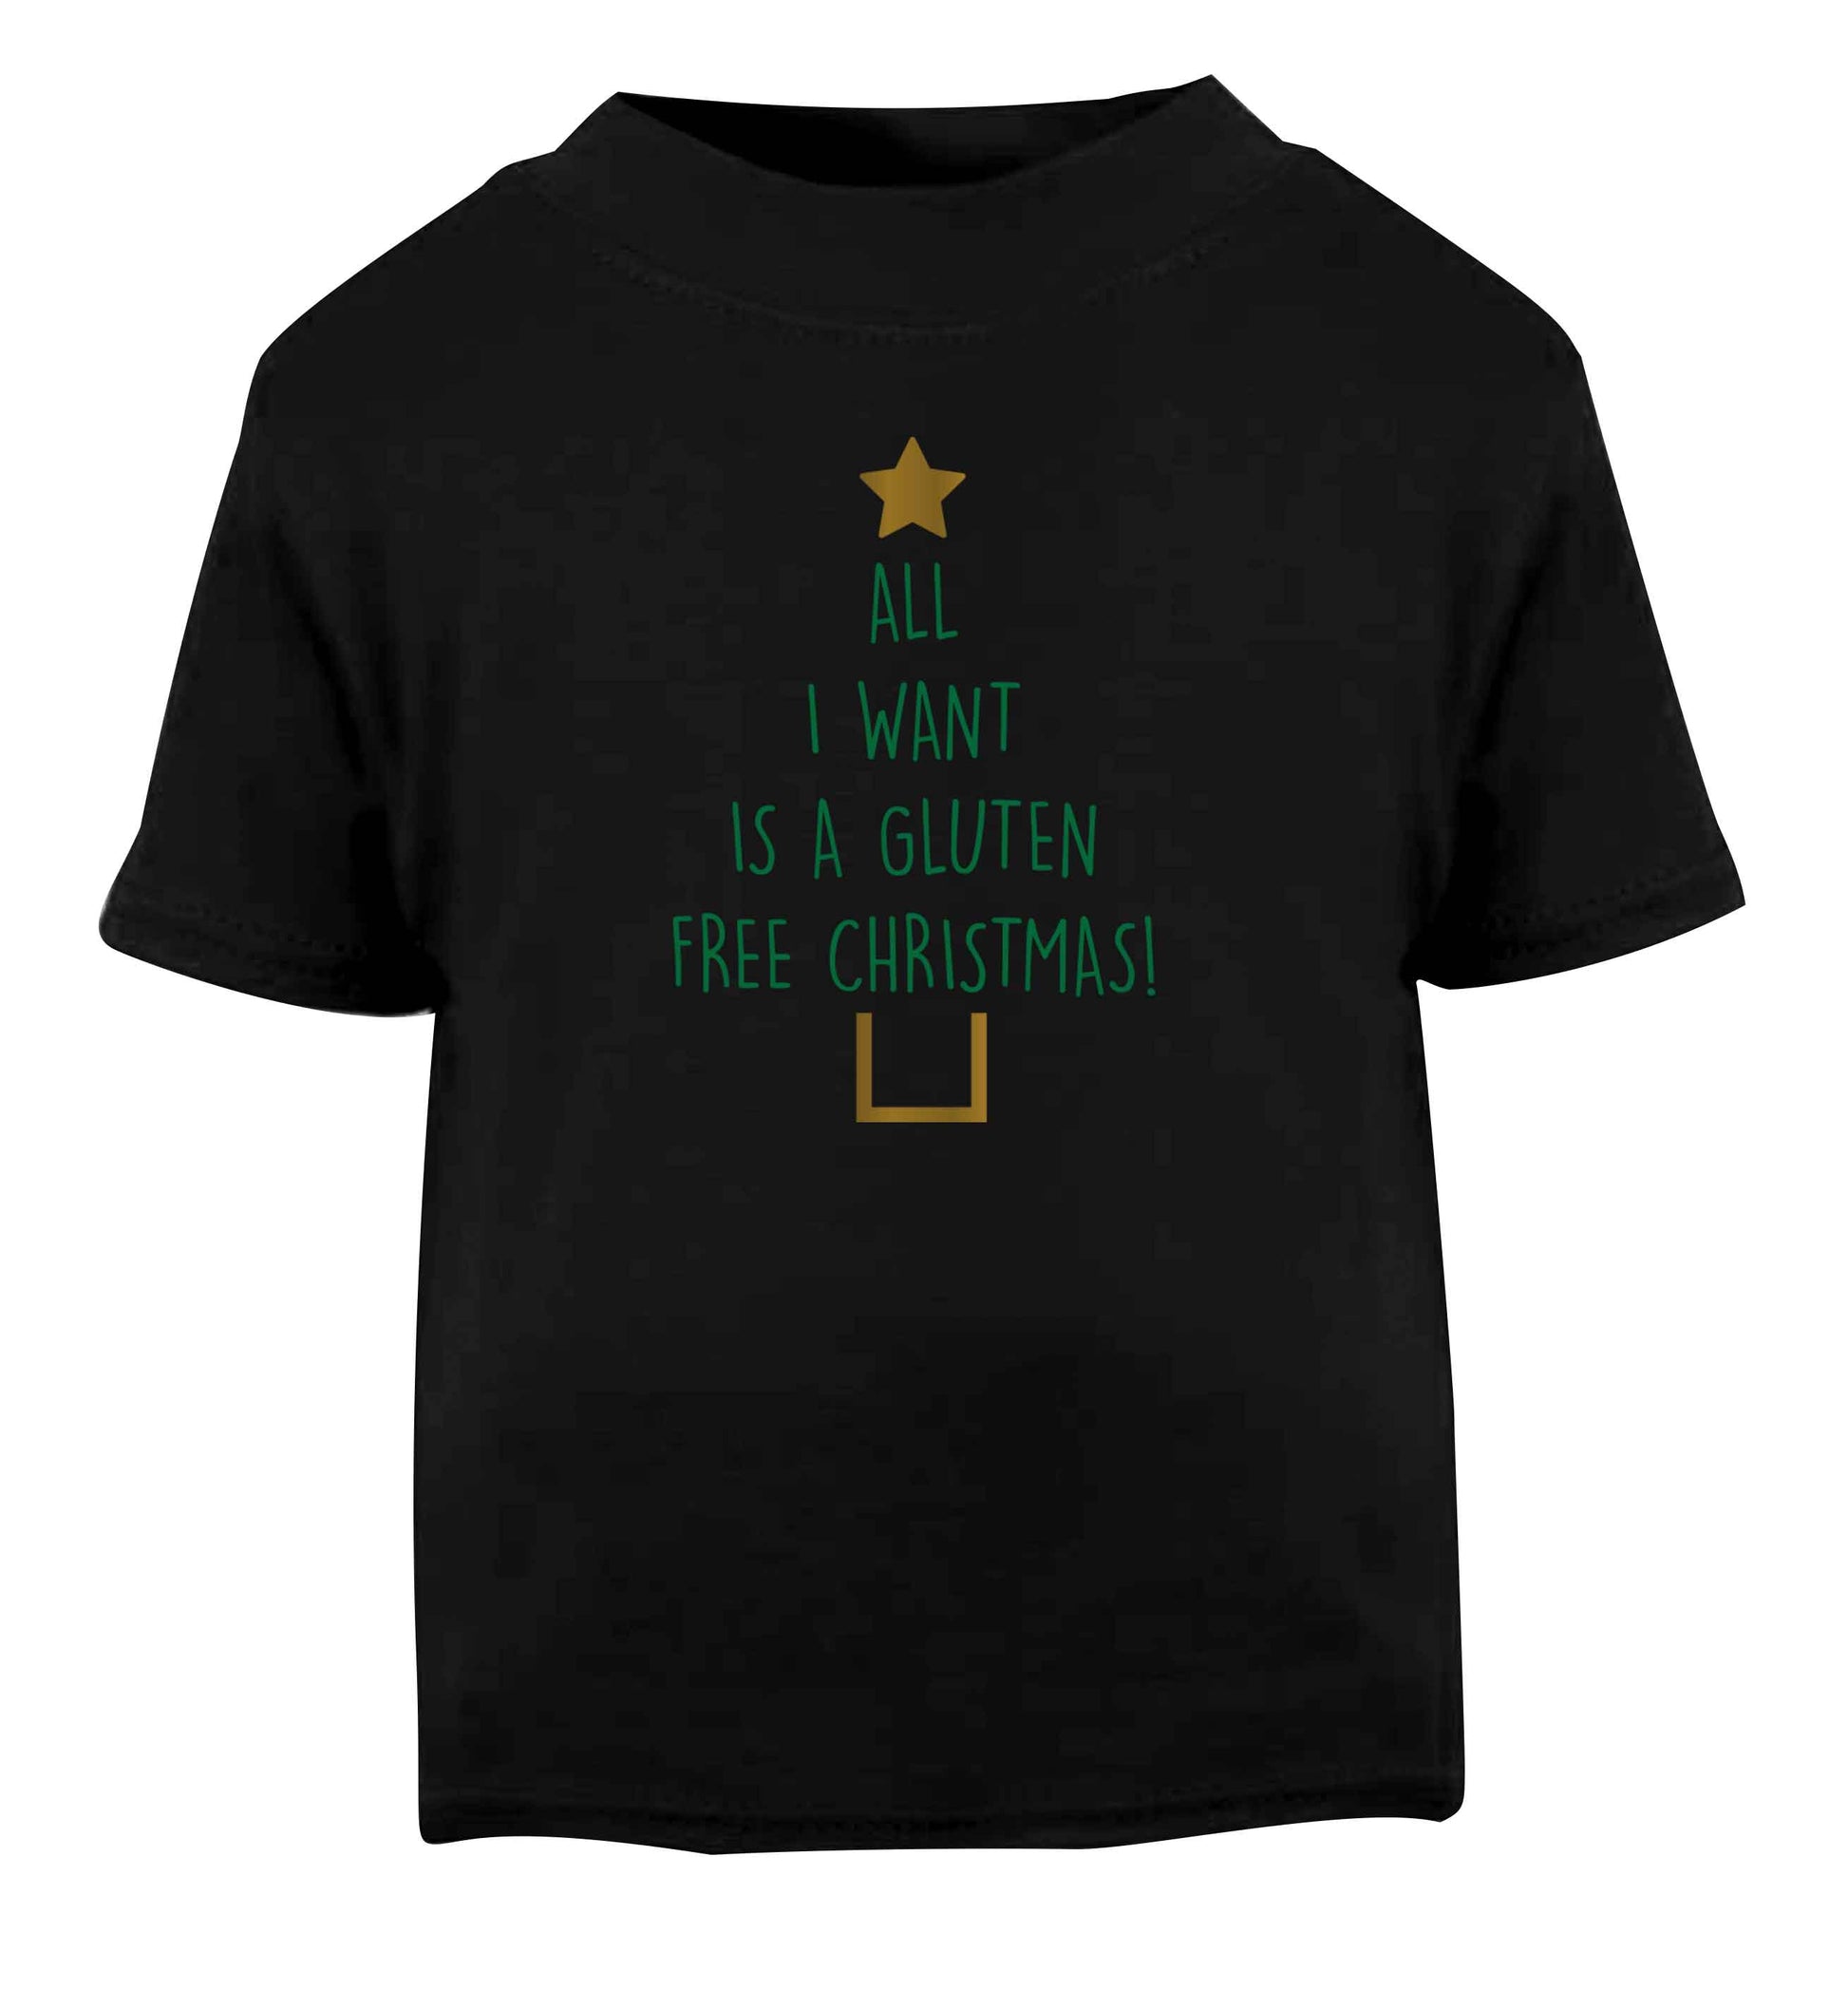 All I want is a gluten free Christmas Black Baby Toddler Tshirt 2 years